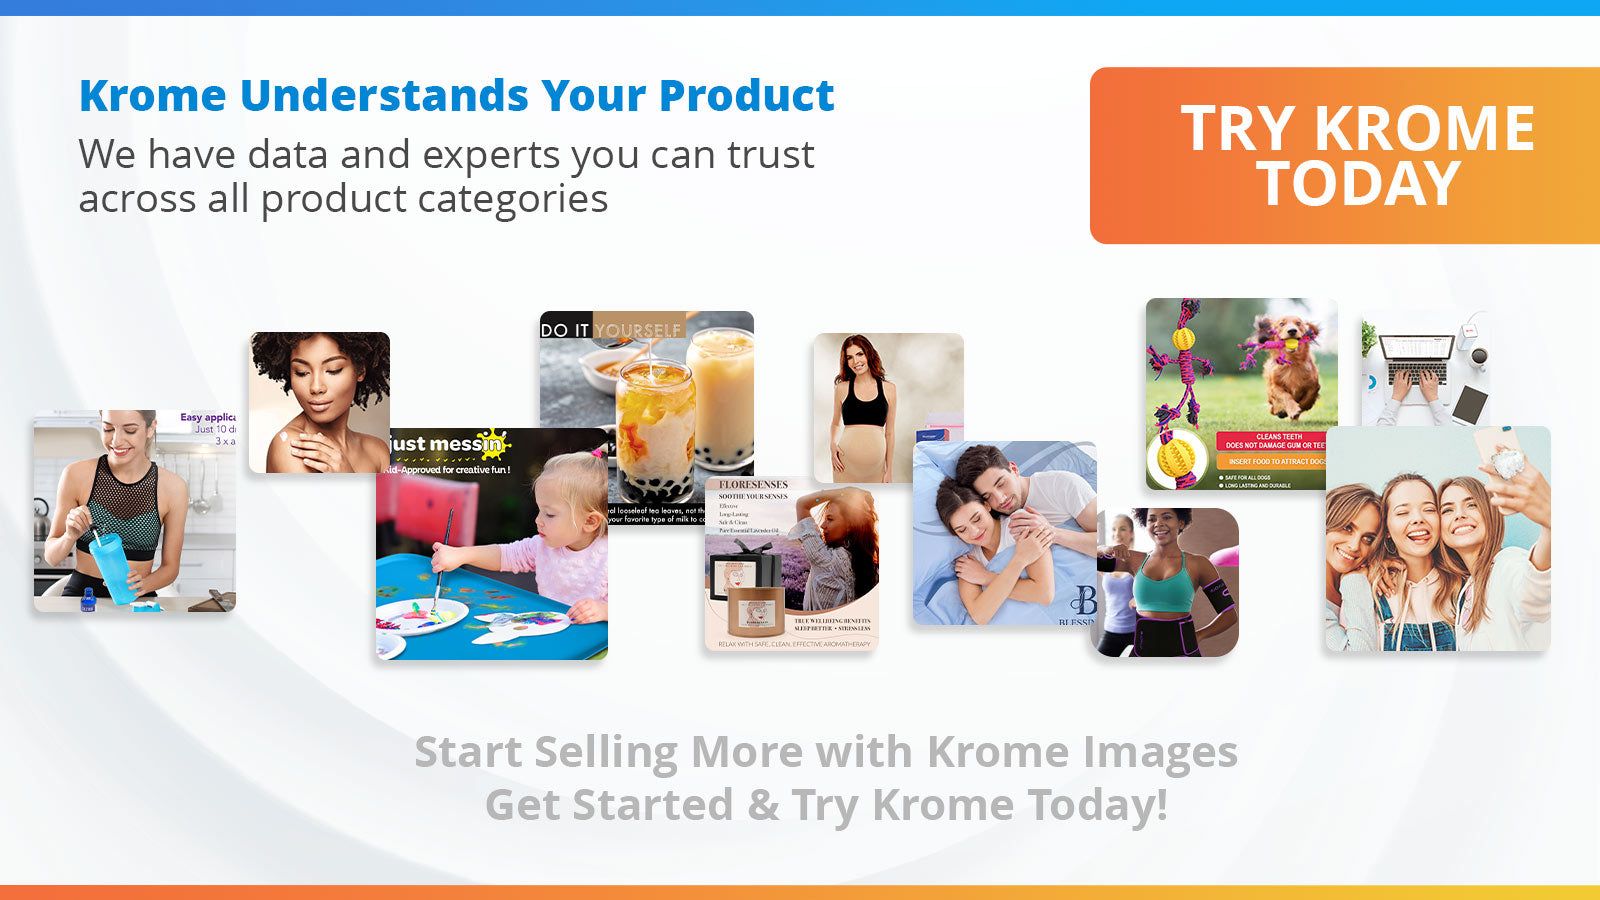 Try Krome Today and Start Selling More